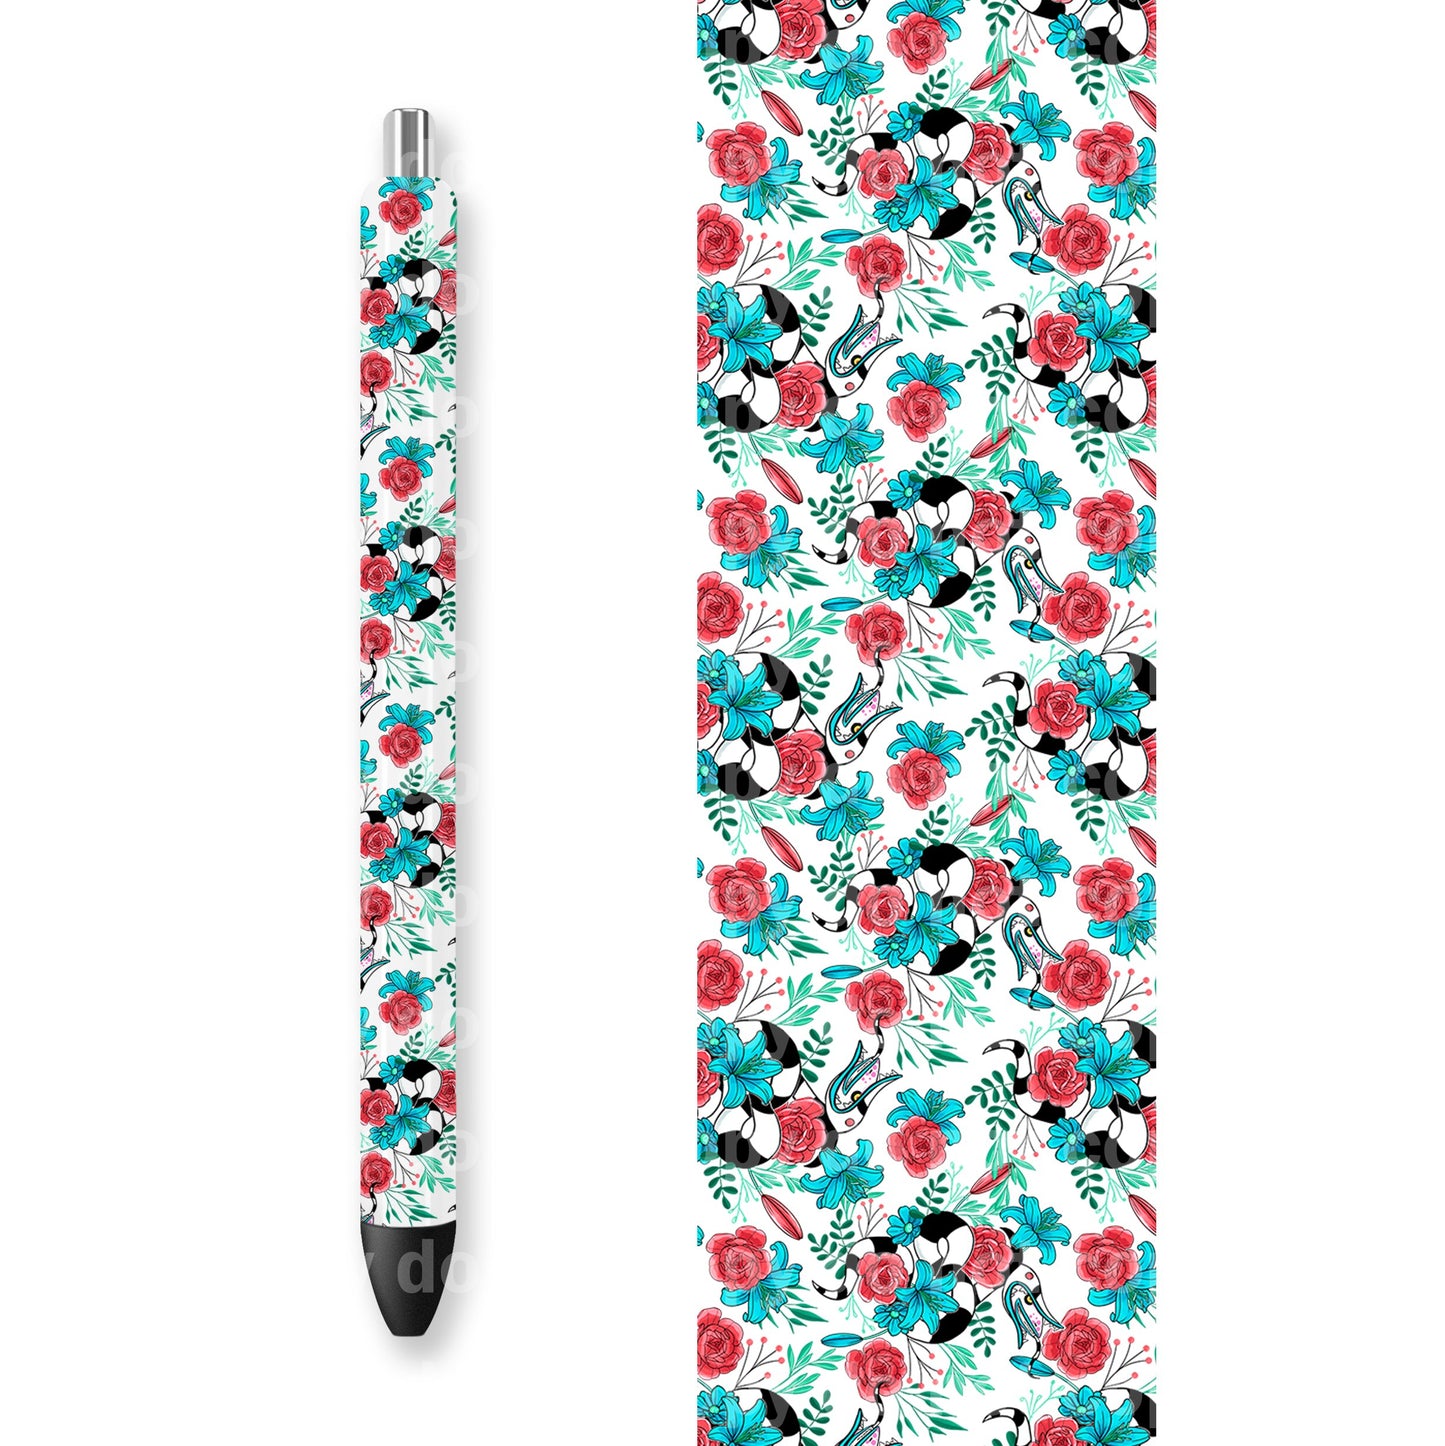 Sand worm sandworm blue And Red Roses 16oz Cup Wrap and Pen Wrap